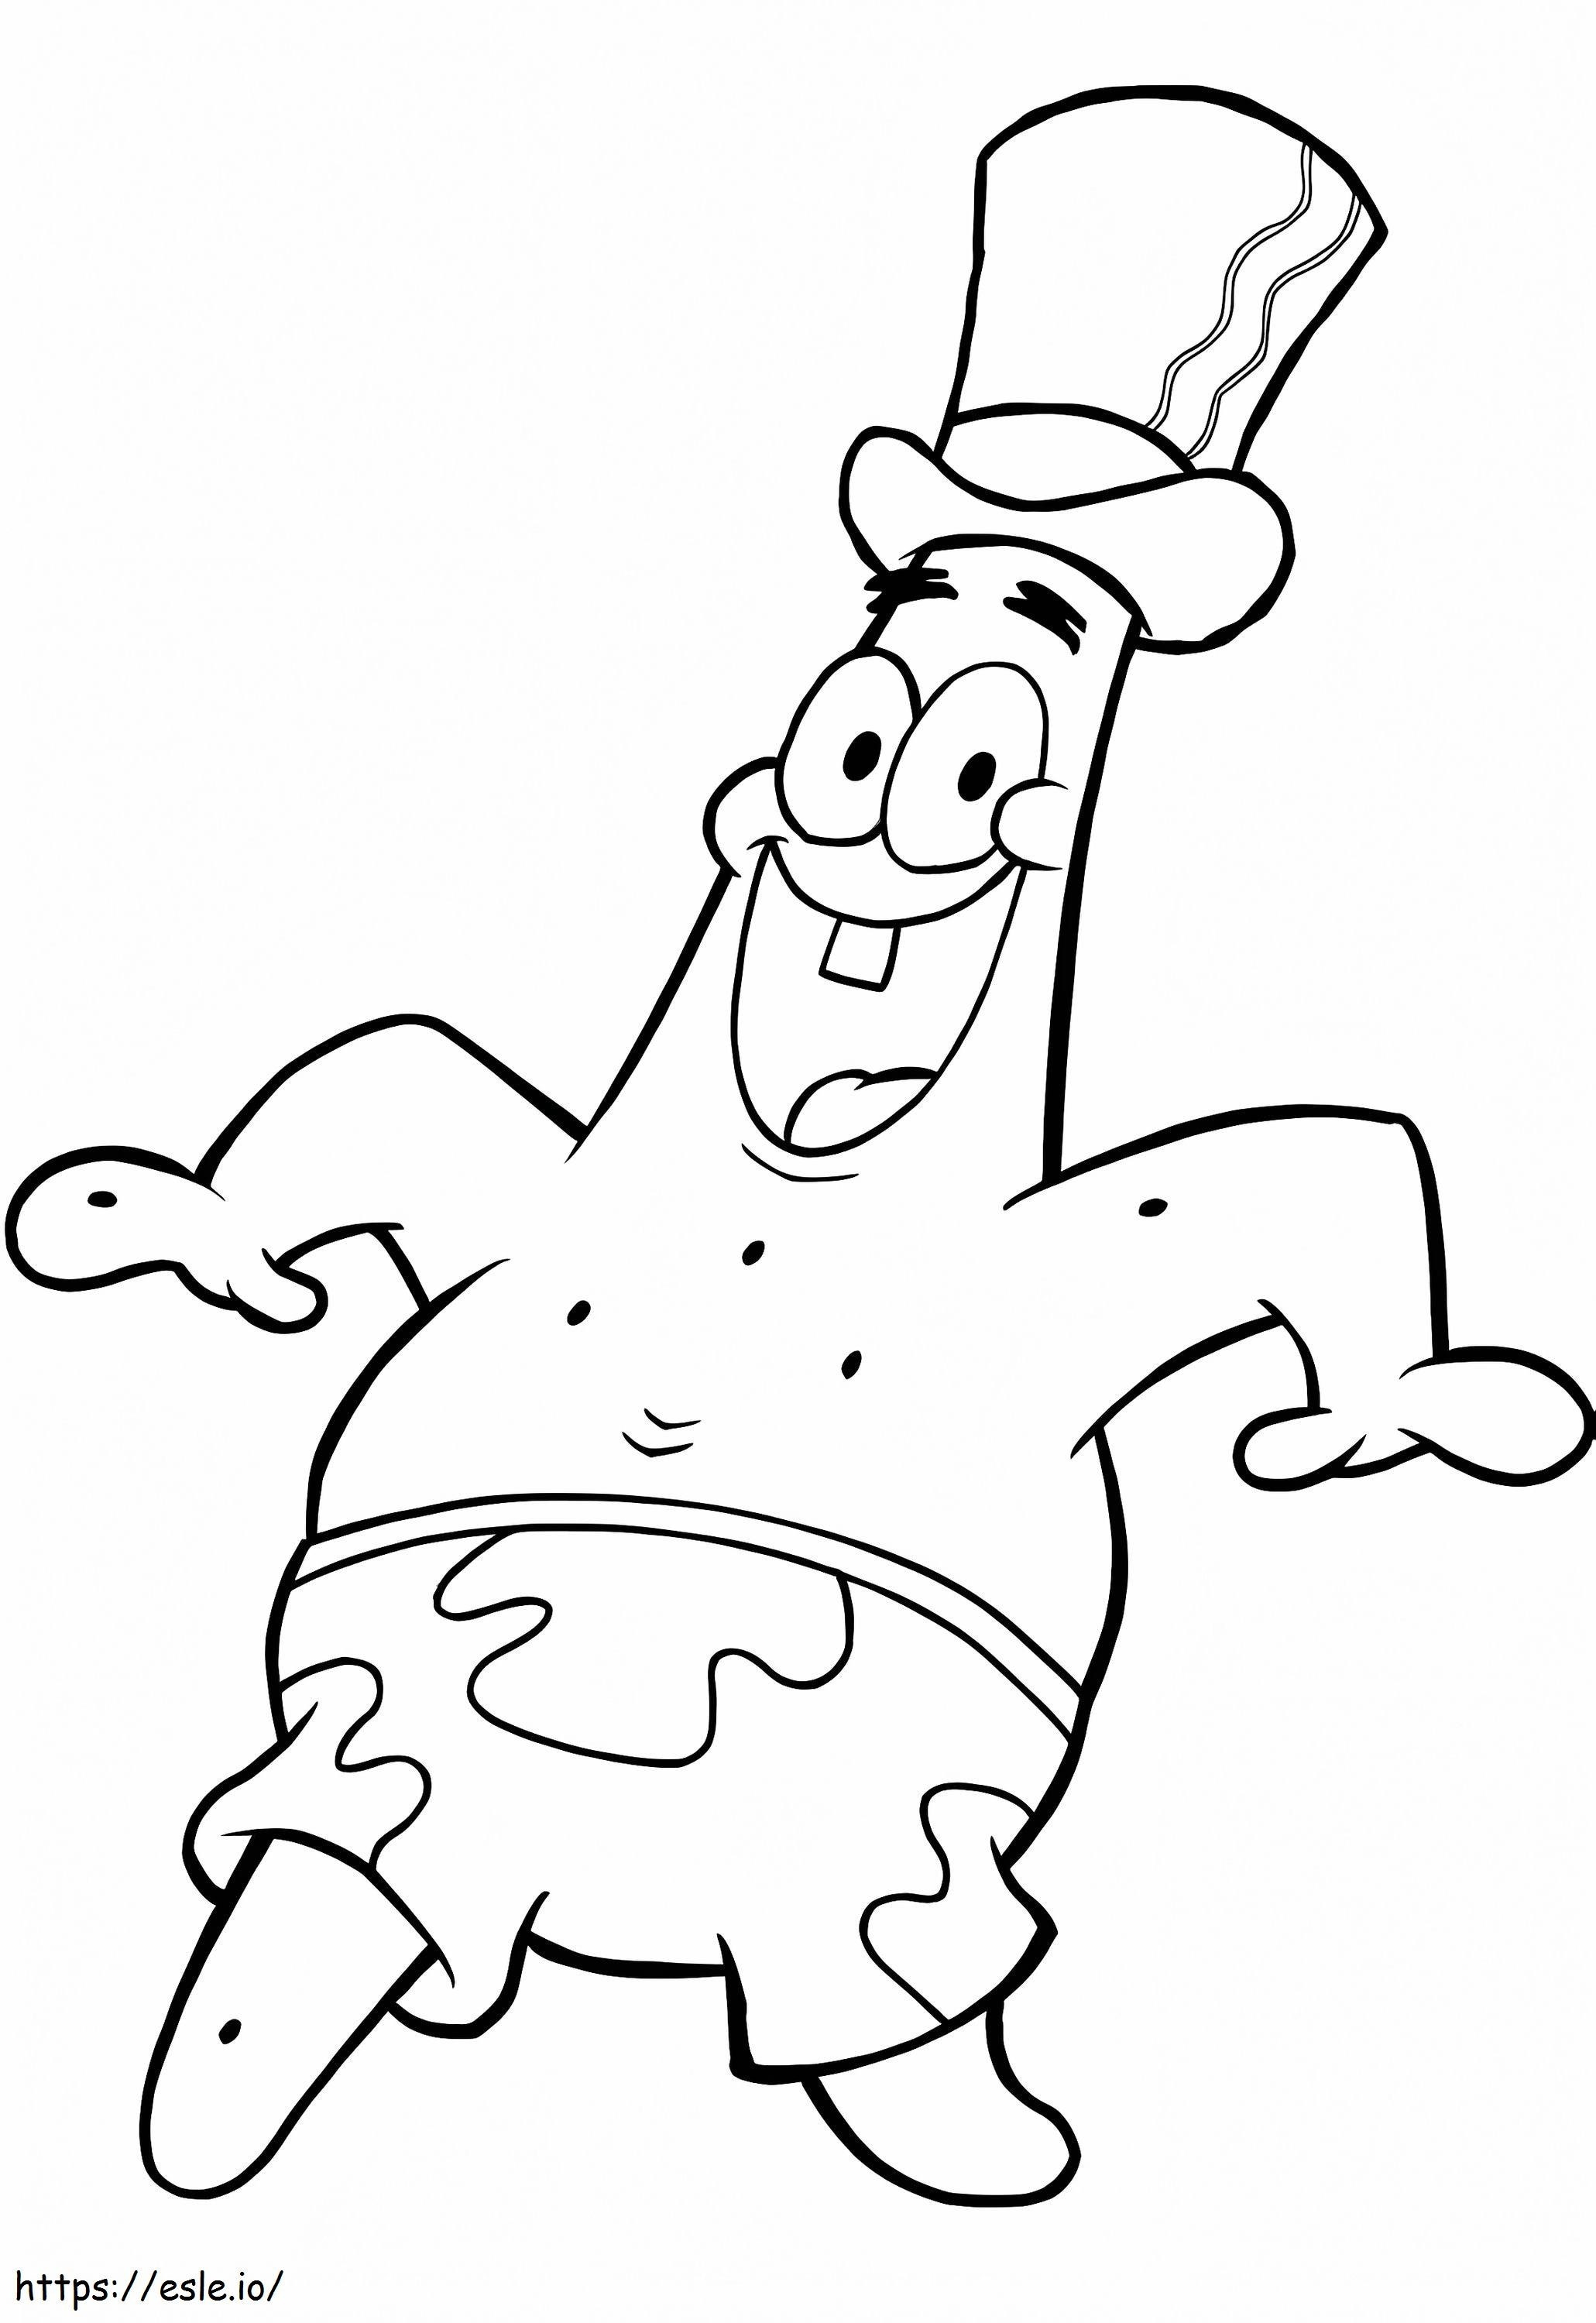 Patrick Star With Hat coloring page